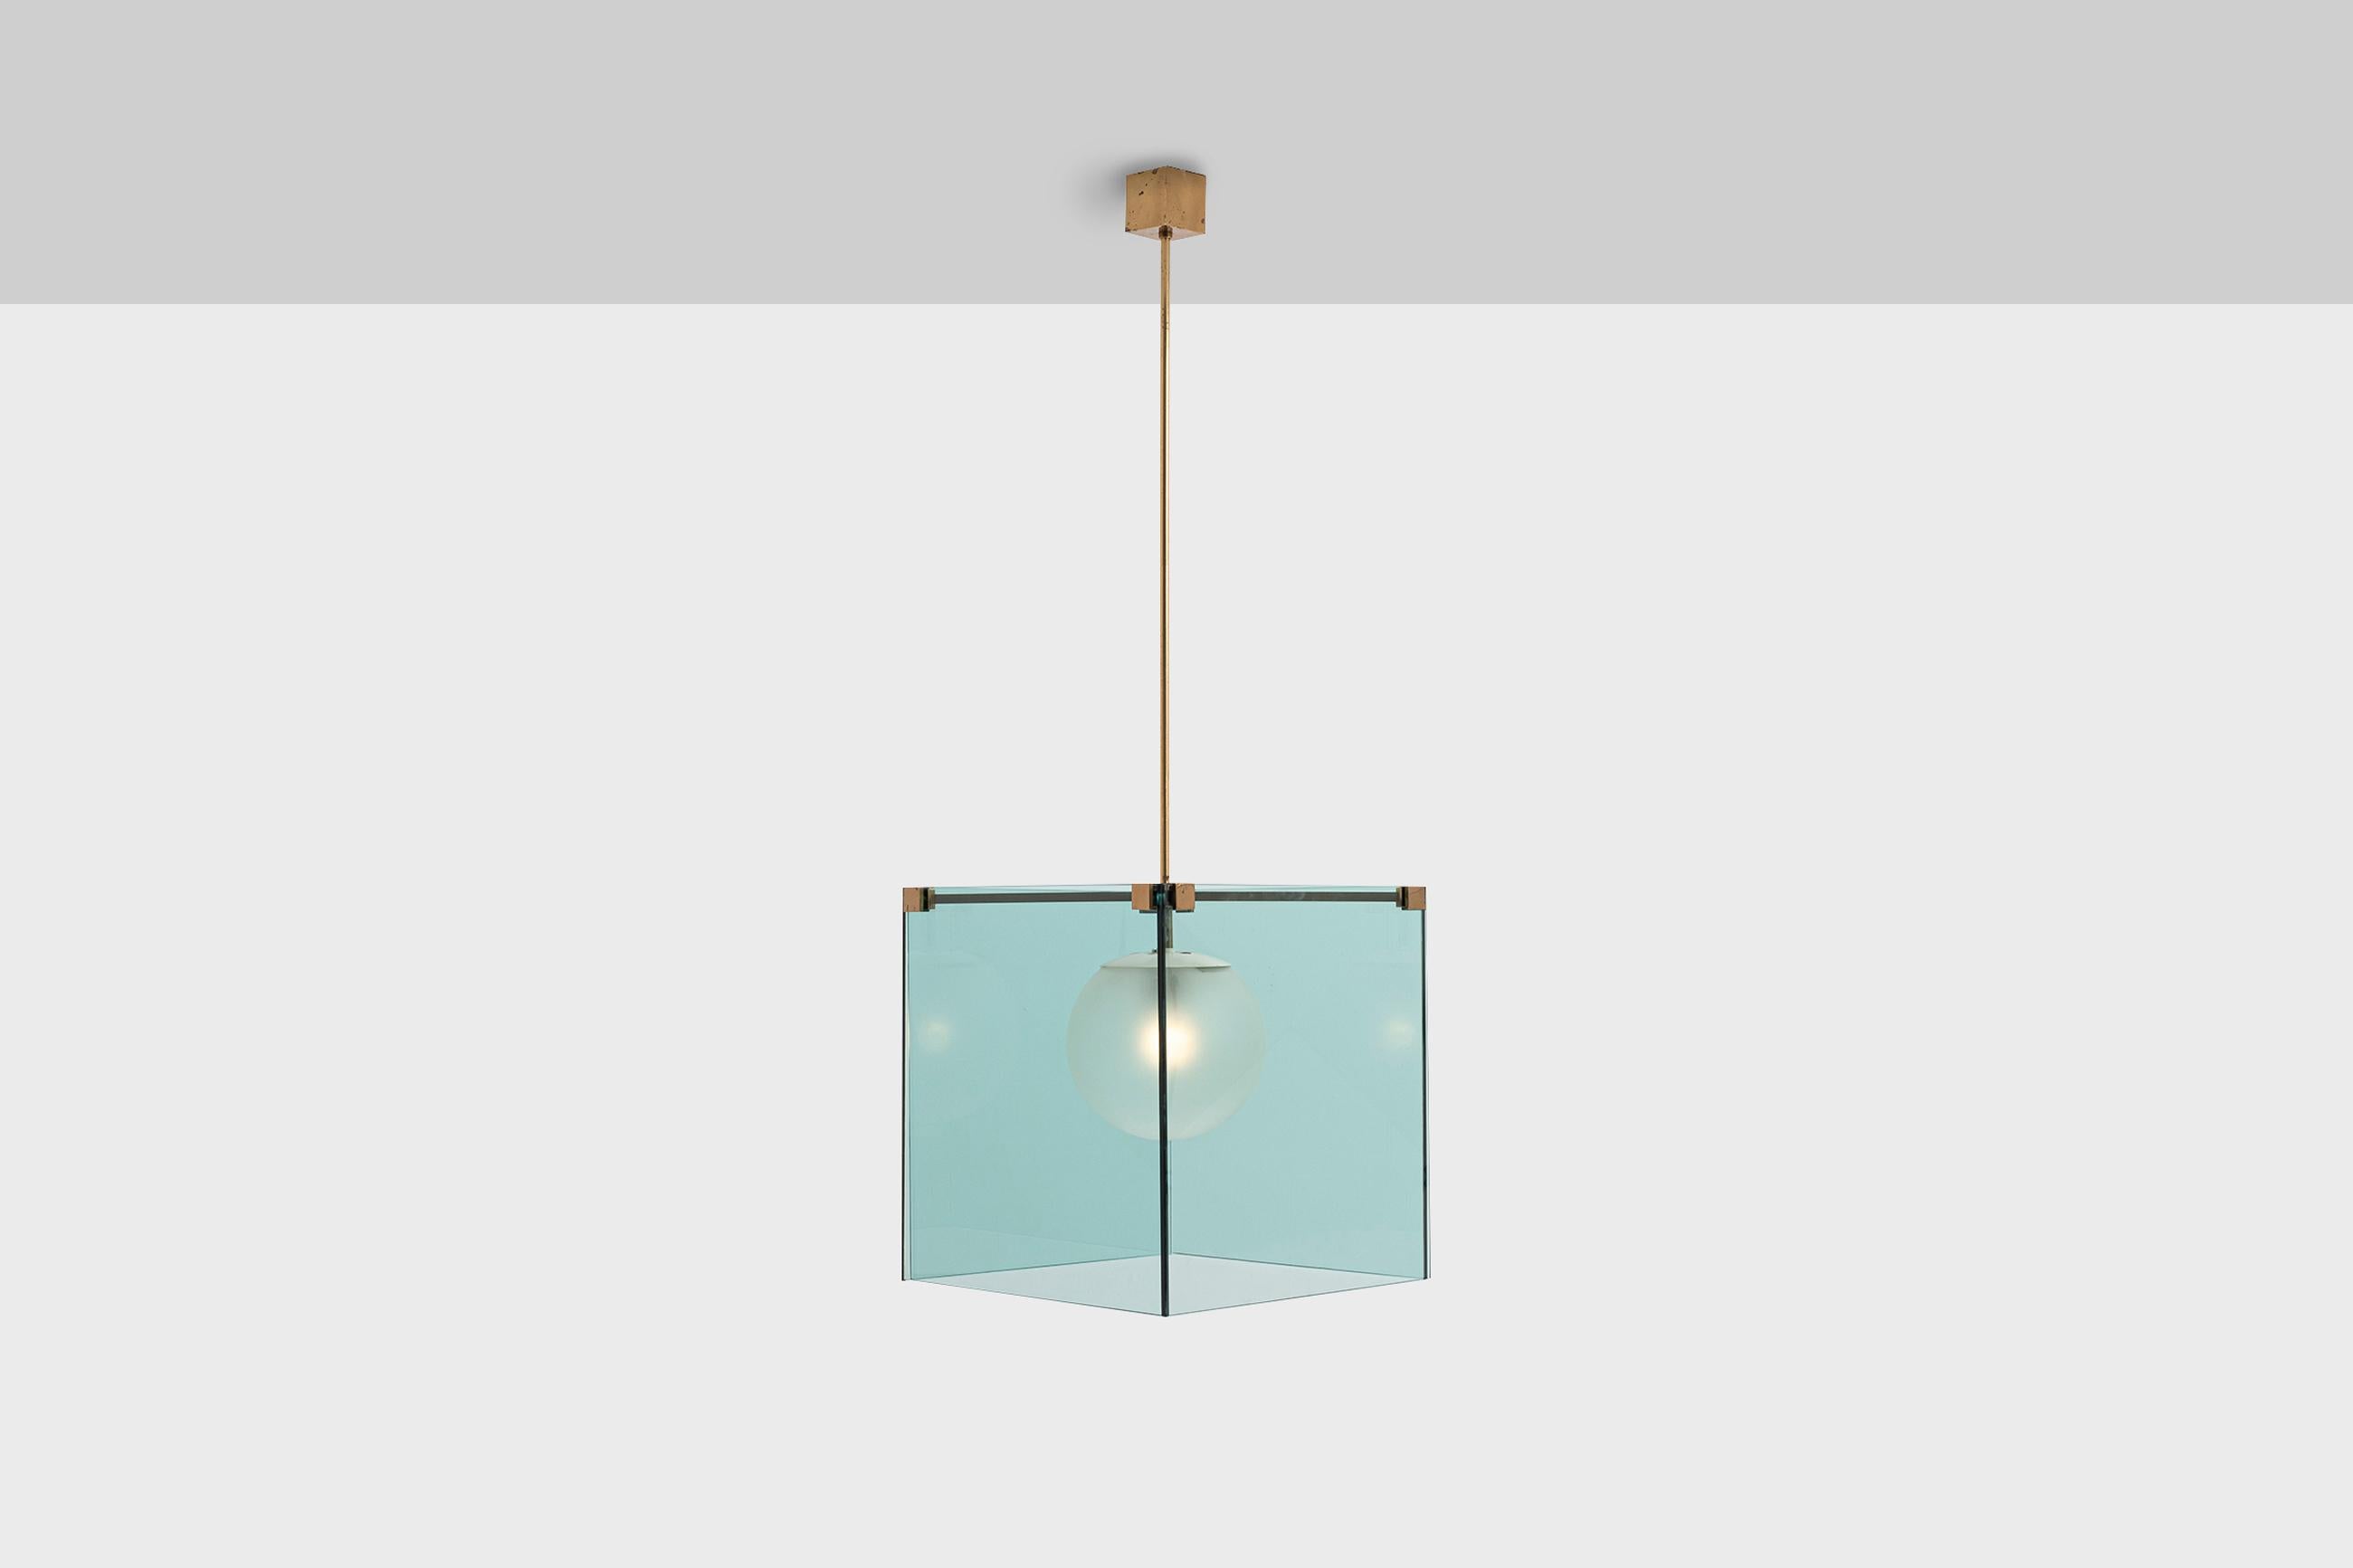 Rare chandelier mod. 2073 by Max Ingrand for Fontana Arte, Italy circa 1960. Sophisticated design composed of 'sea blue' colored glass plates, a frosted glass globe, white lacquered aluminium structure and brass framing. The warm colored brass